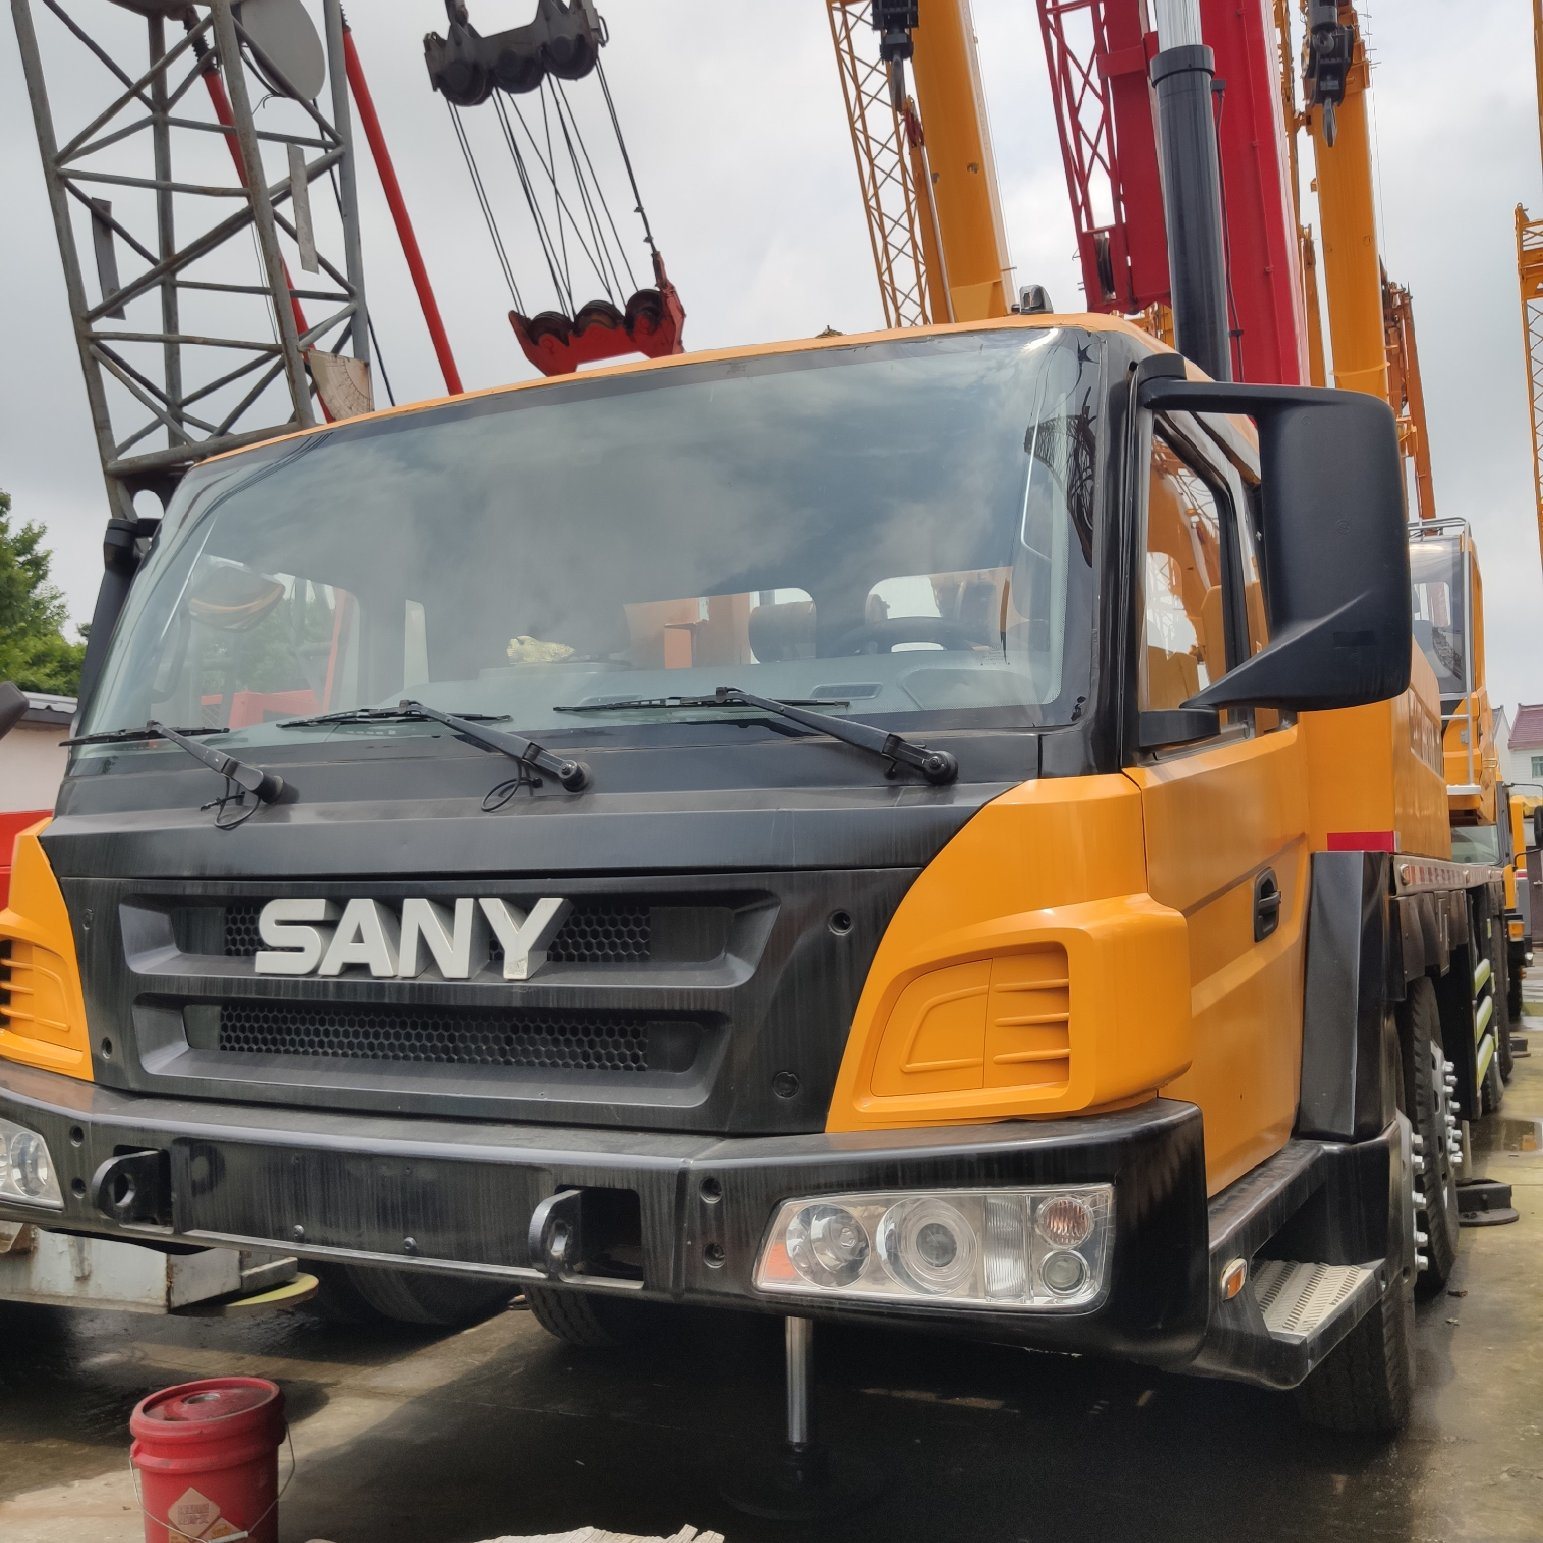 Used Sany Qy25c Mobile Crane Used 25t Truck Crane, Qy25c, Qy50c, Qy75c, 25t, 50t, 75t 100t Truck Crane / Sany 75ton Crane